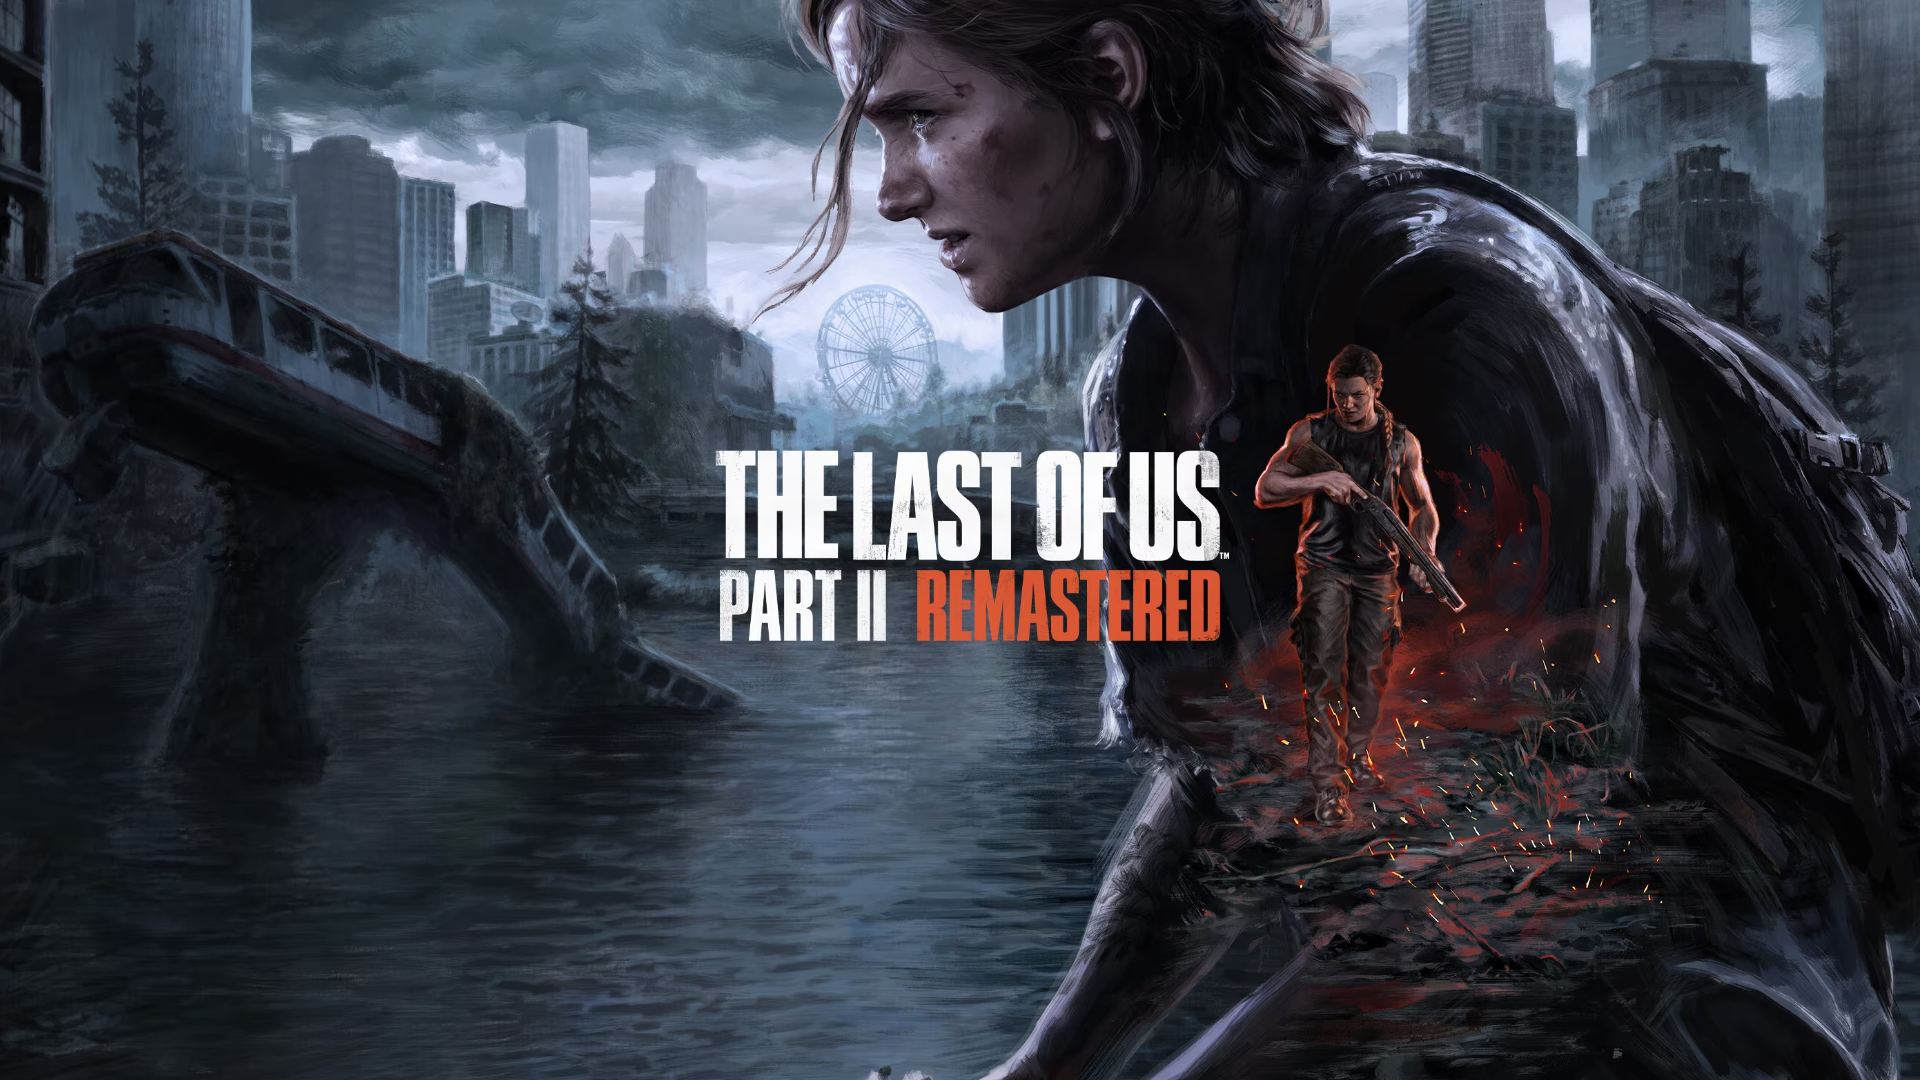 Do we really need a The Last of Us Part 2 remastered?